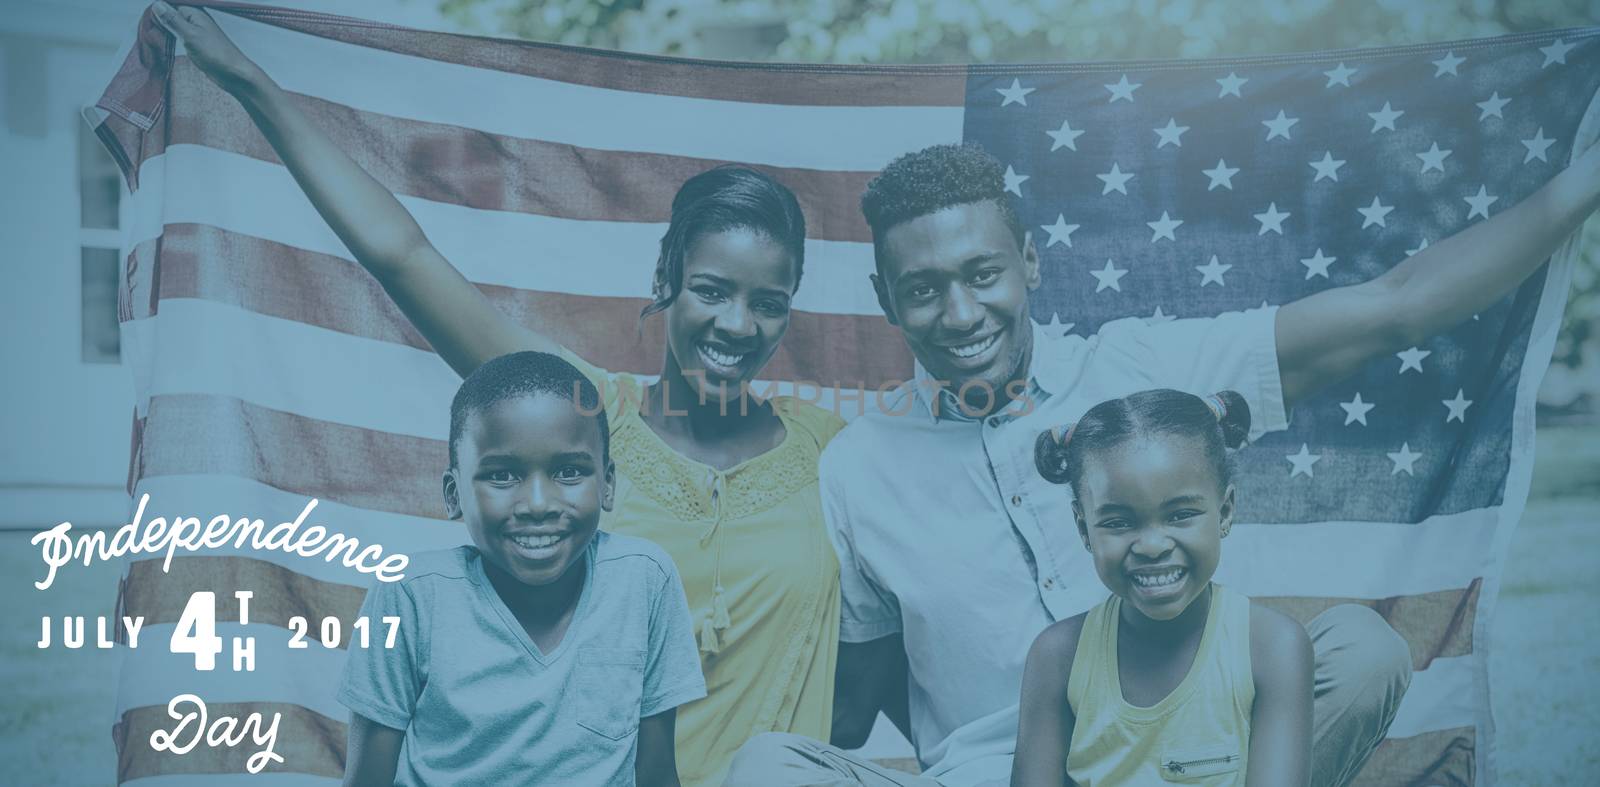 Digitally generated image of happy 4th of july message against happy family holding american flag